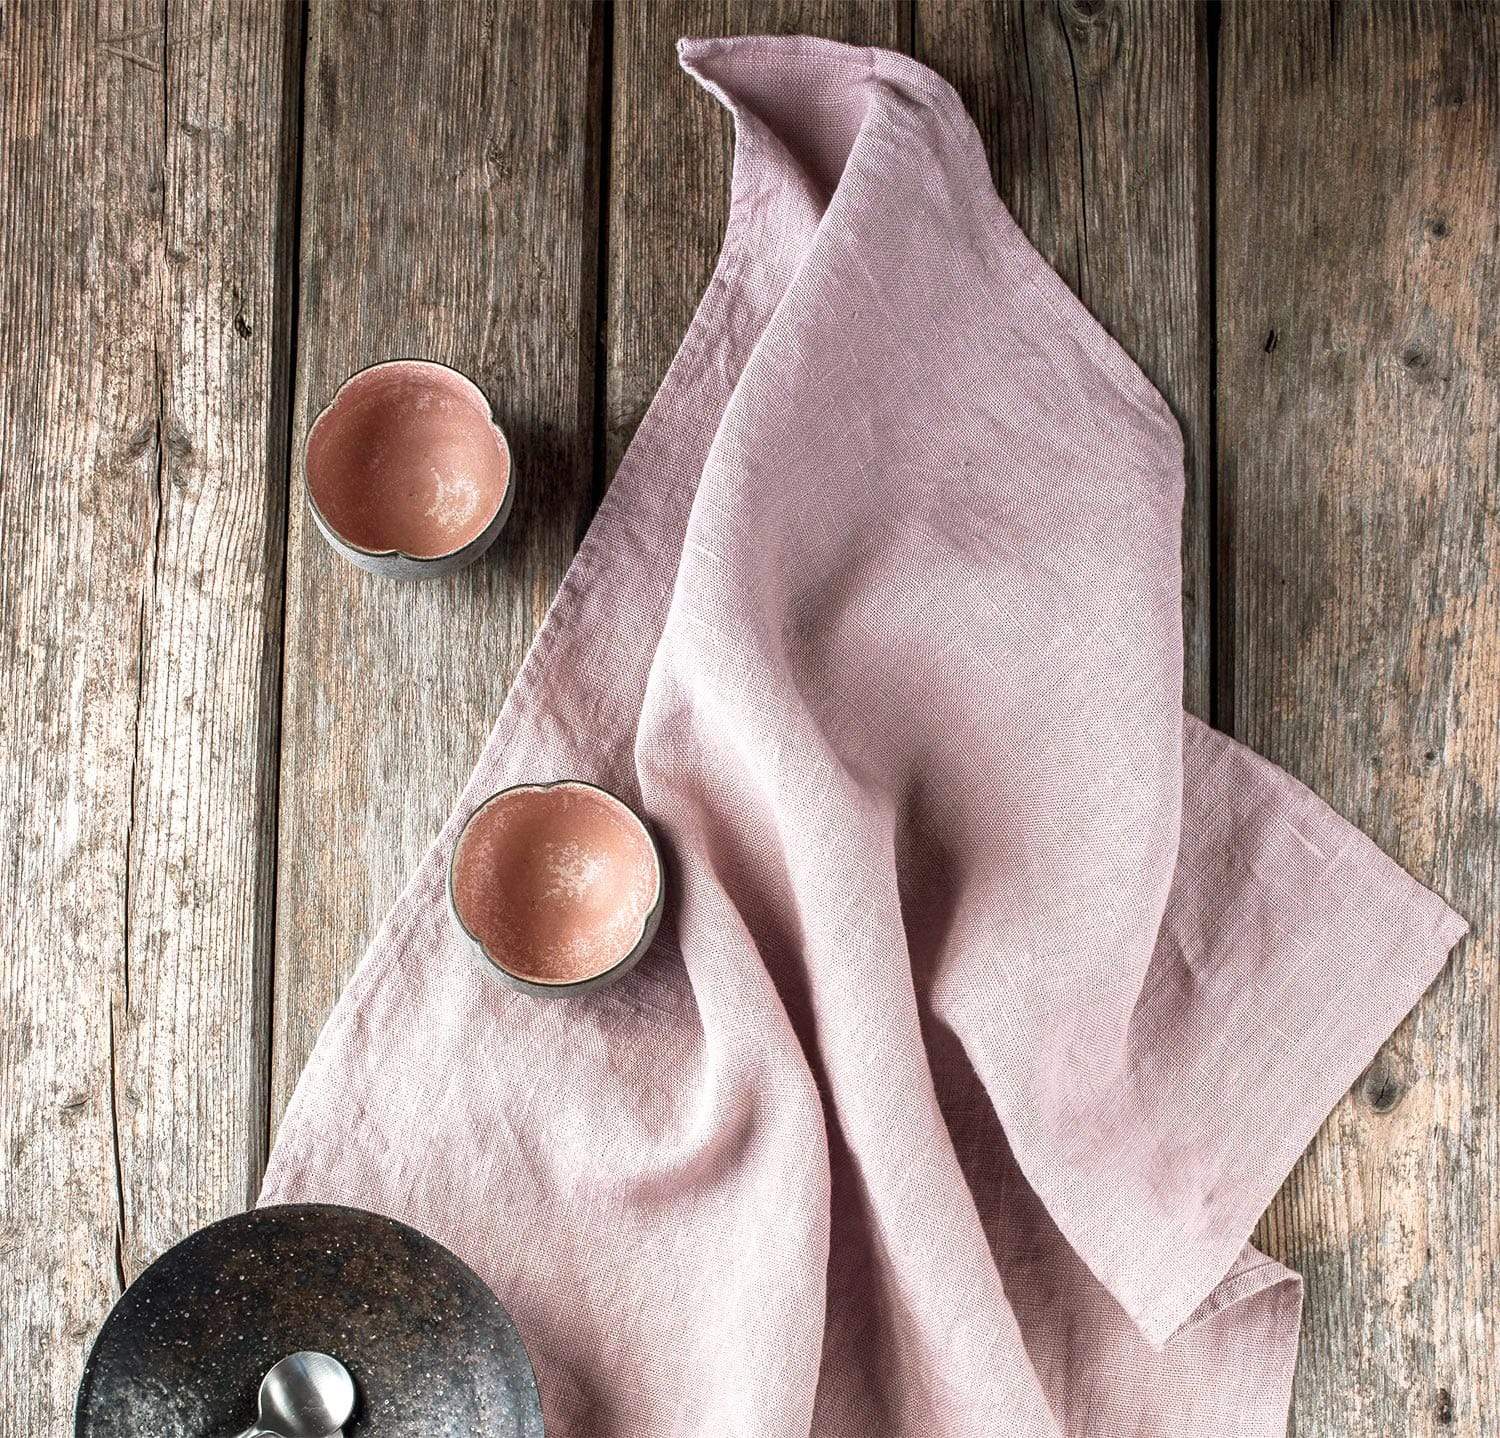 Checked Linen Kitchen Towel, Natural Washed Linen Tea Towels, Organic Beige  Blue Red White Linen Towel, Linen Vegan Towel, Linen Dishtowel 